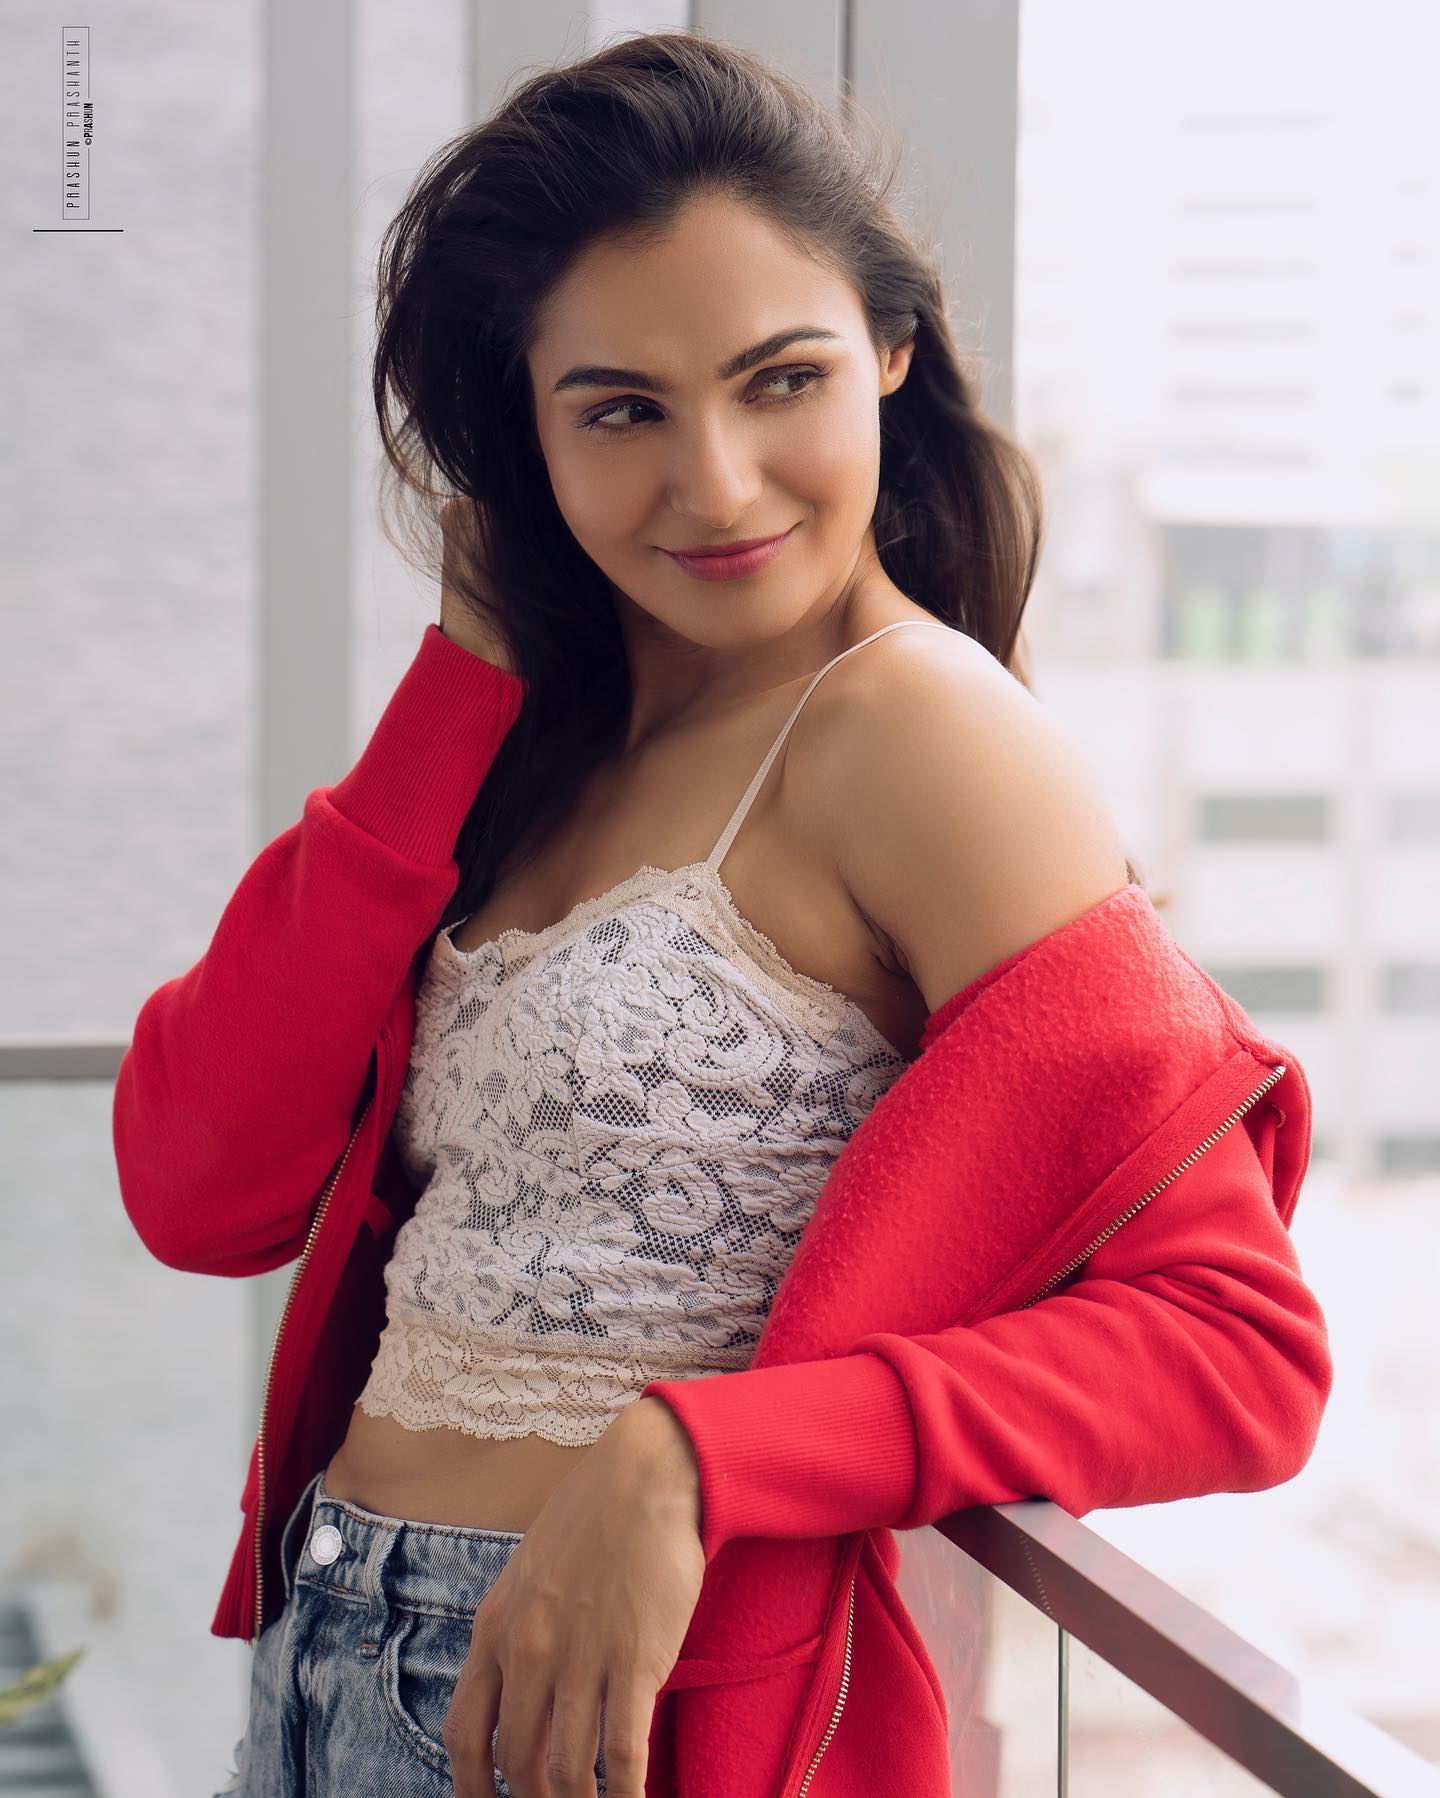 andrea-jeremiah-in-red-dress-photos-003